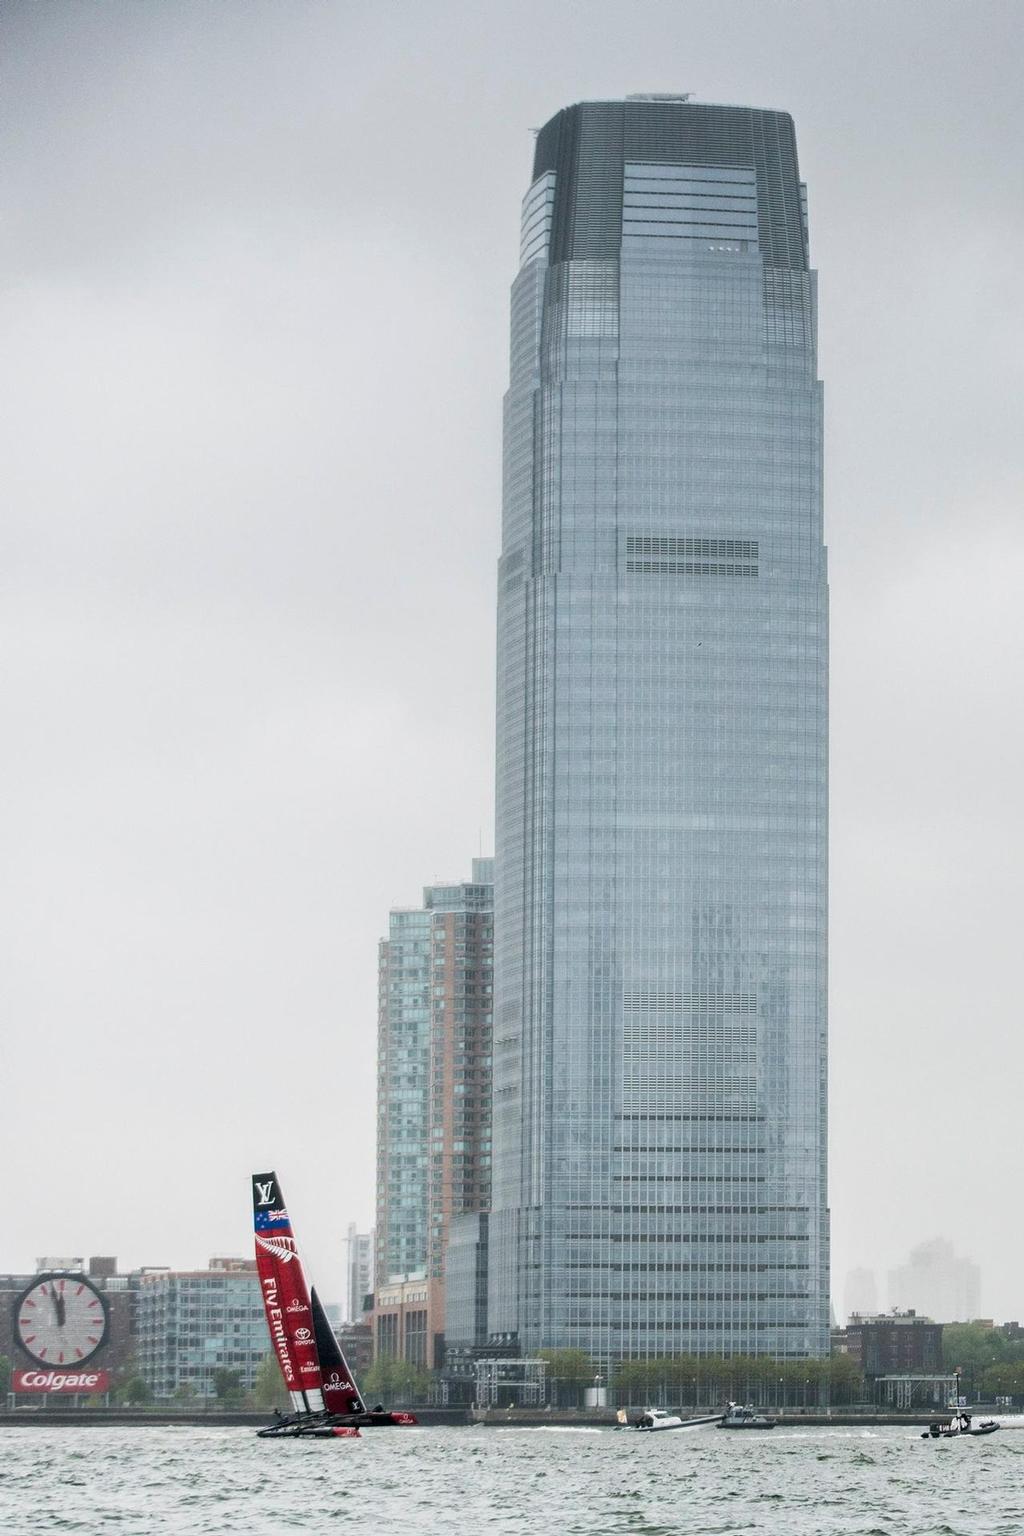 - Louis Vuitton America’s Cup World Series New York, Day 1 © Emirates Team New Zealand http://www.etnzblog.com